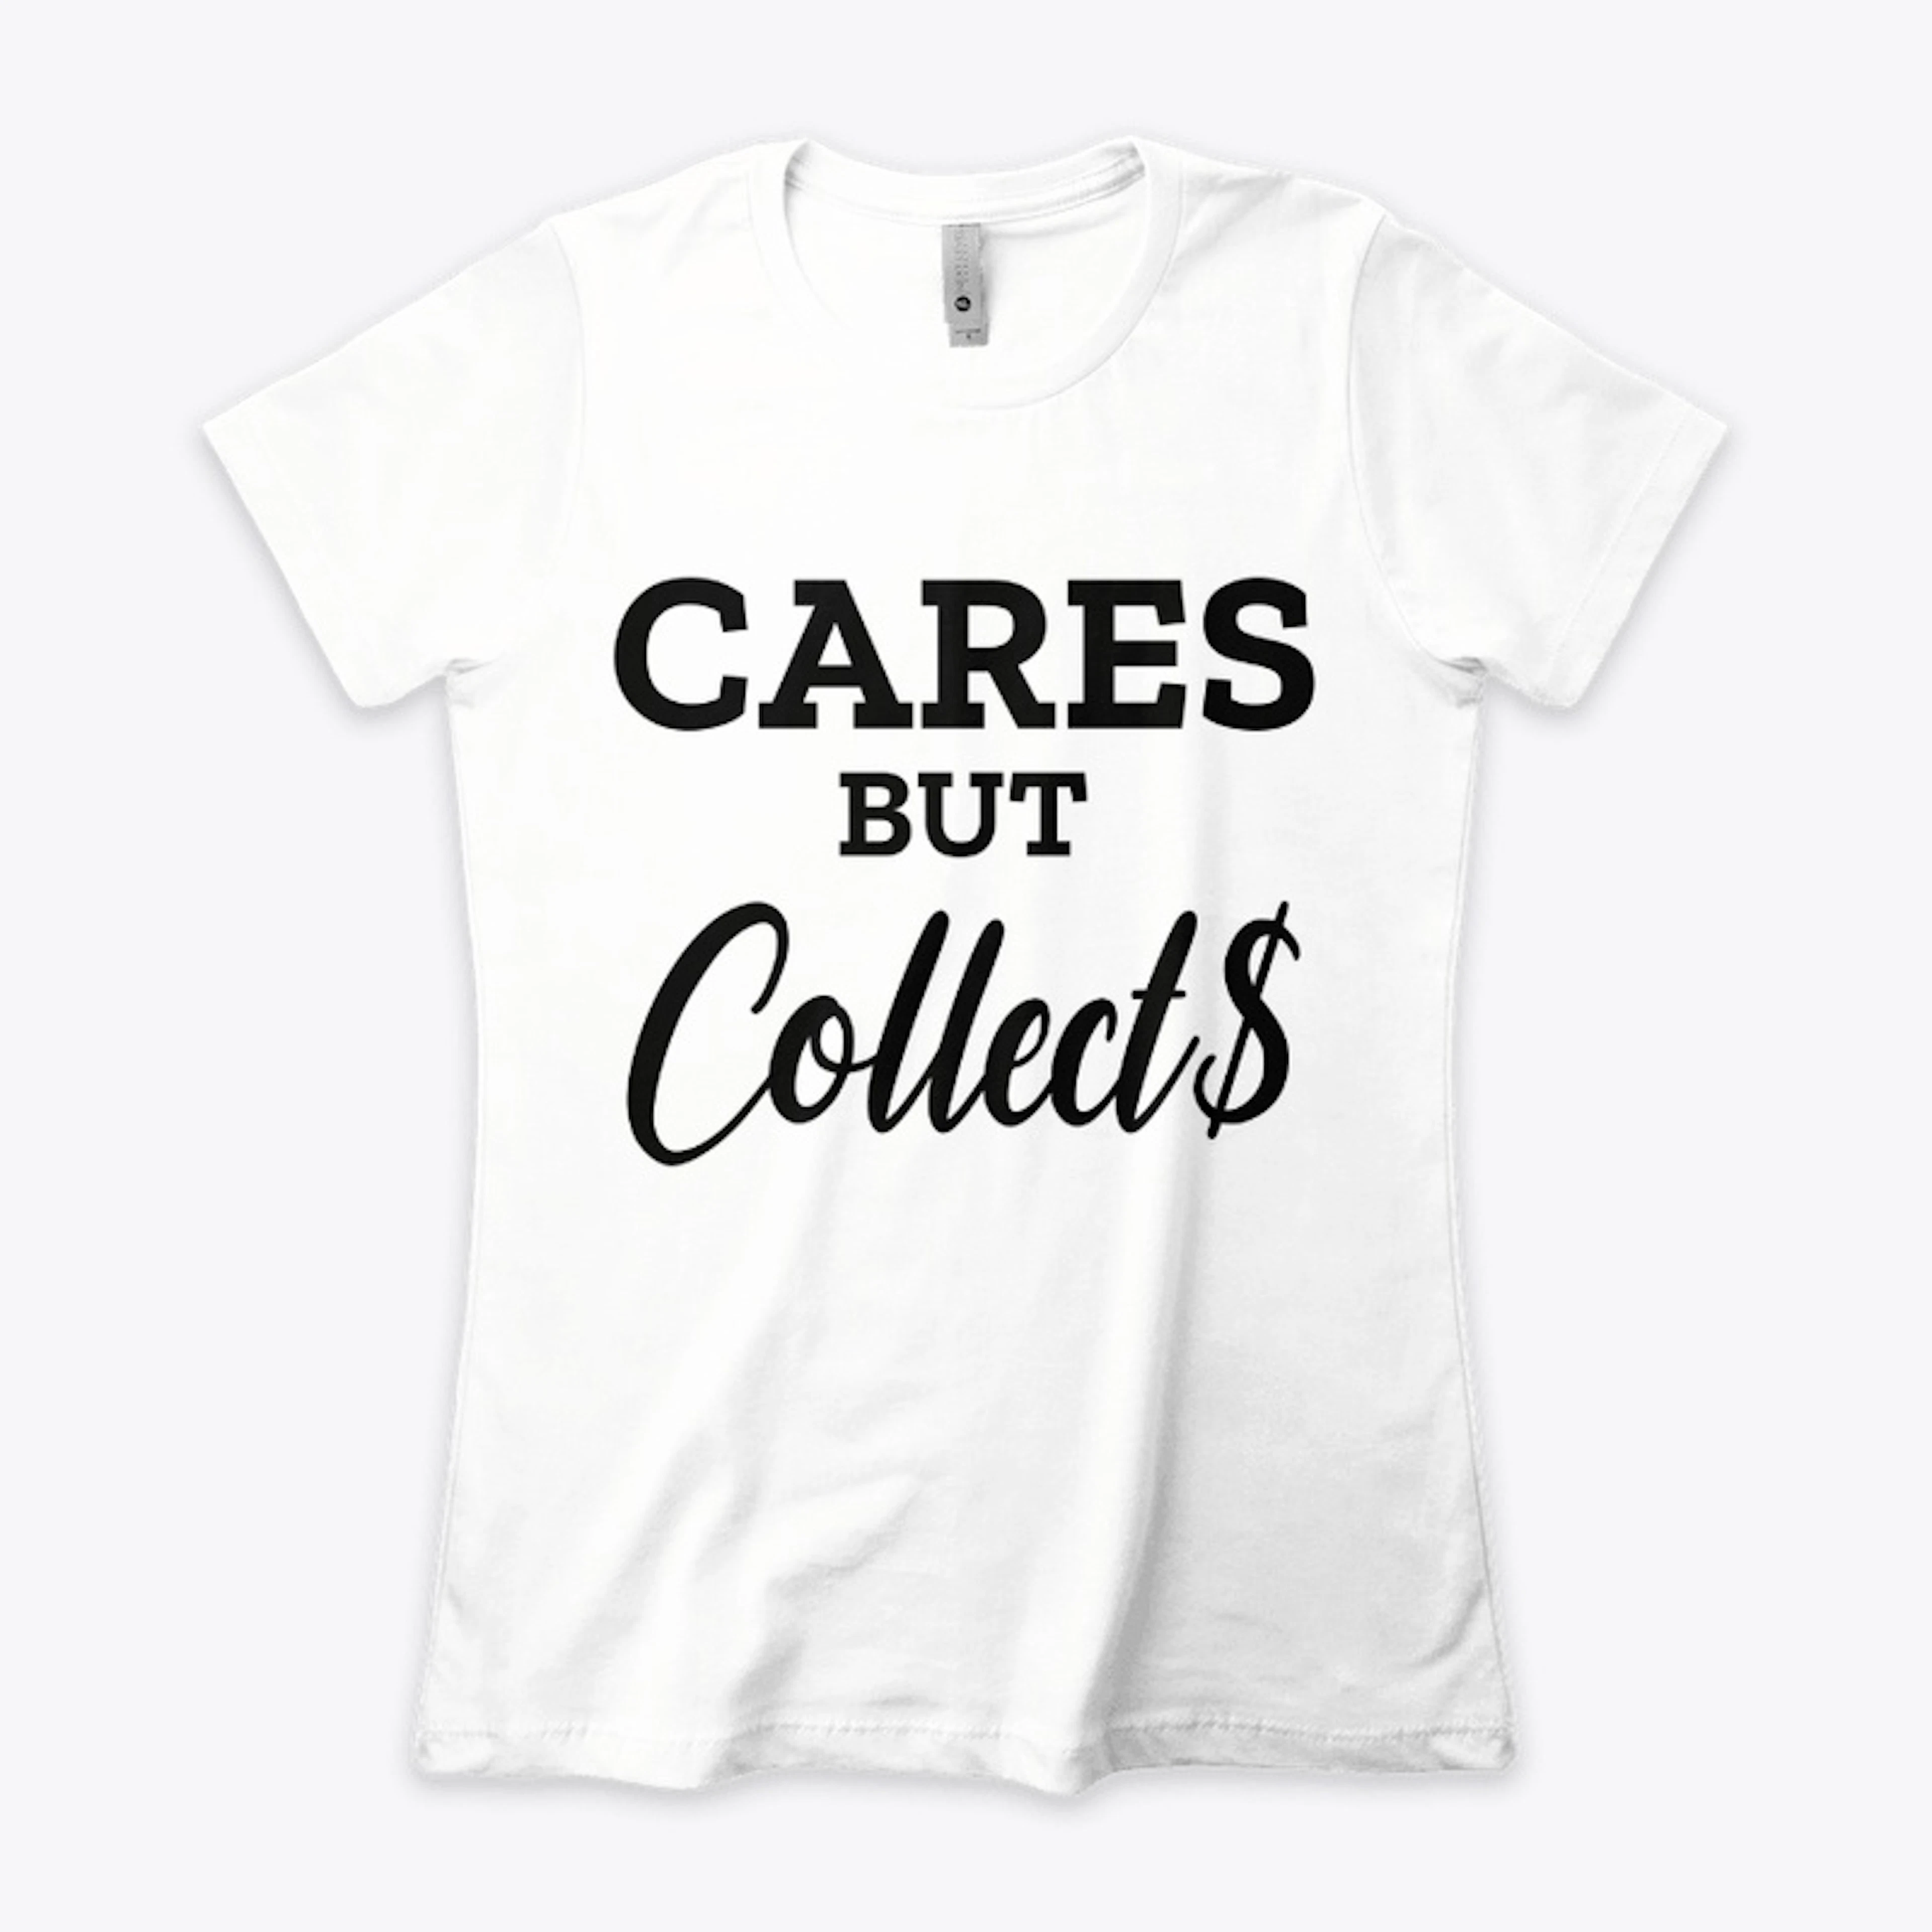 Cares but Collect$